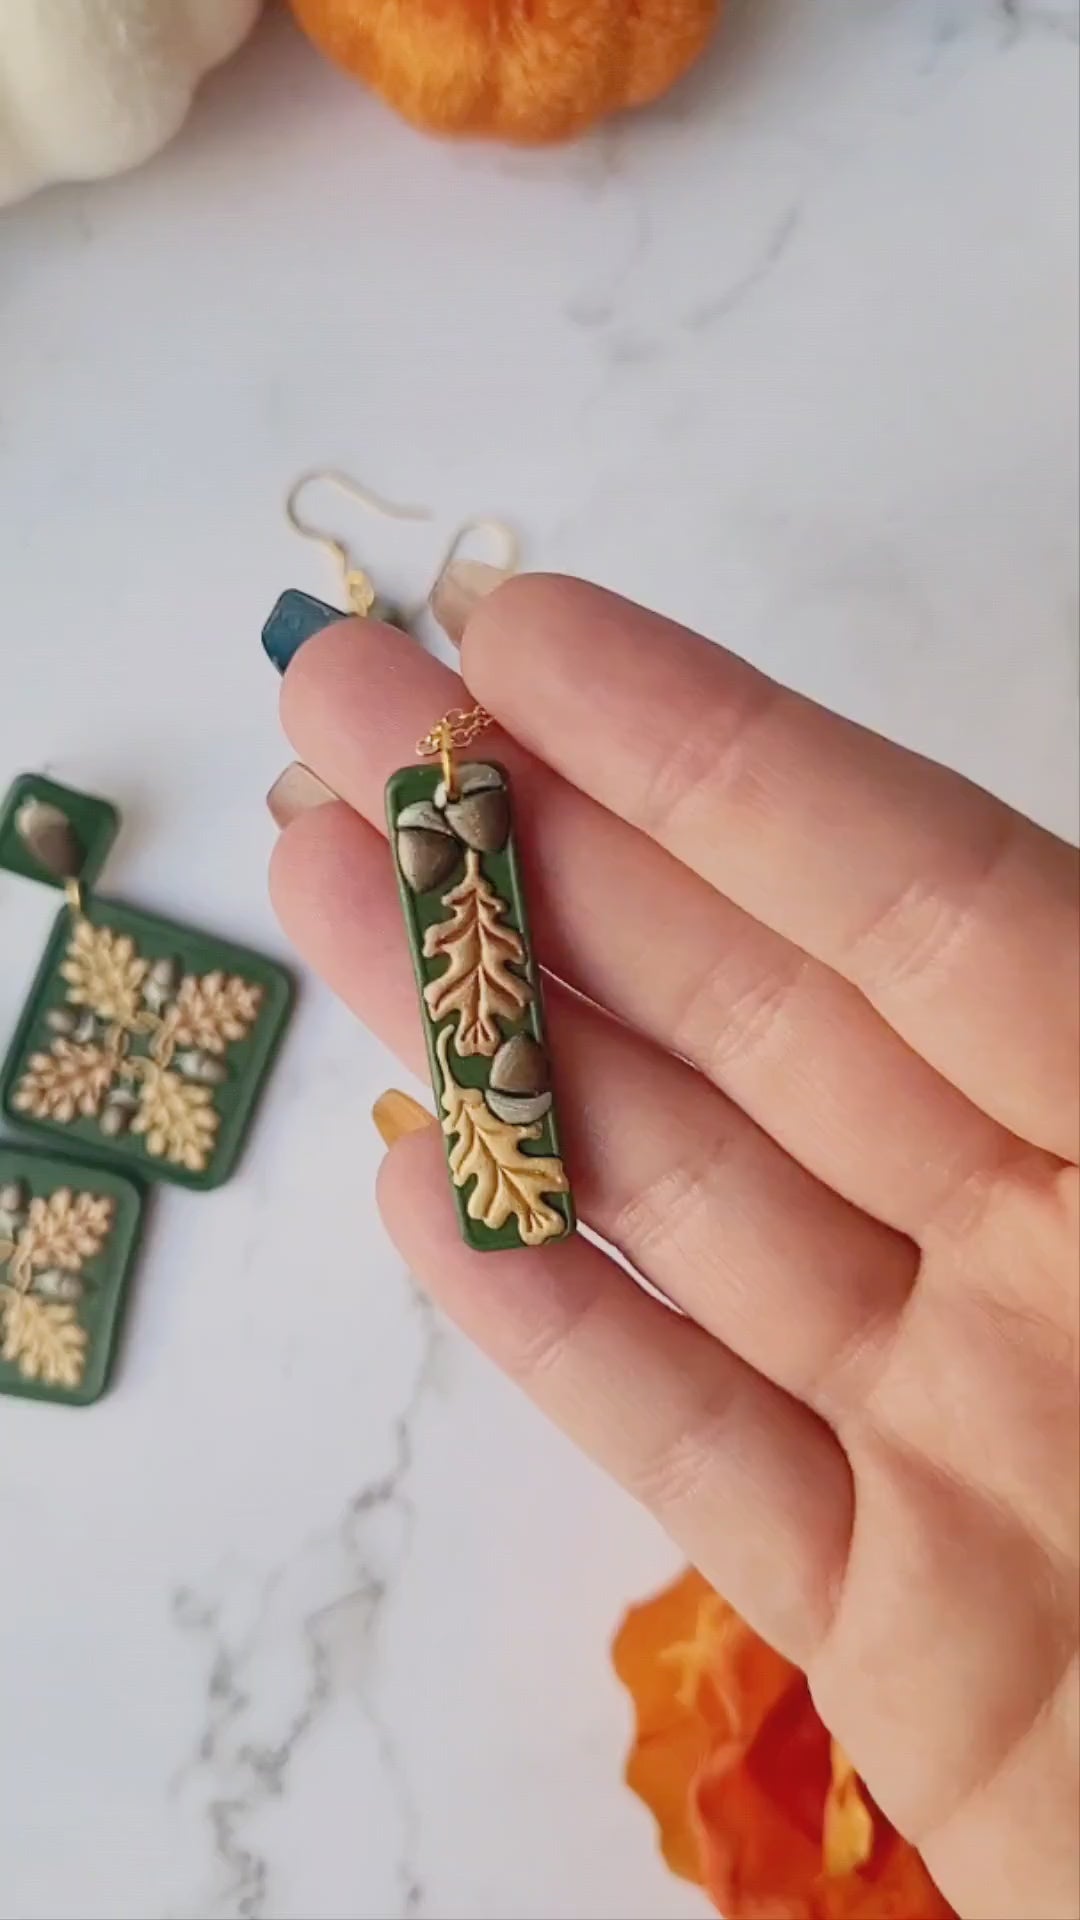 video close up of the Green bar shaped pendant with metallic acorns and oak leaves.